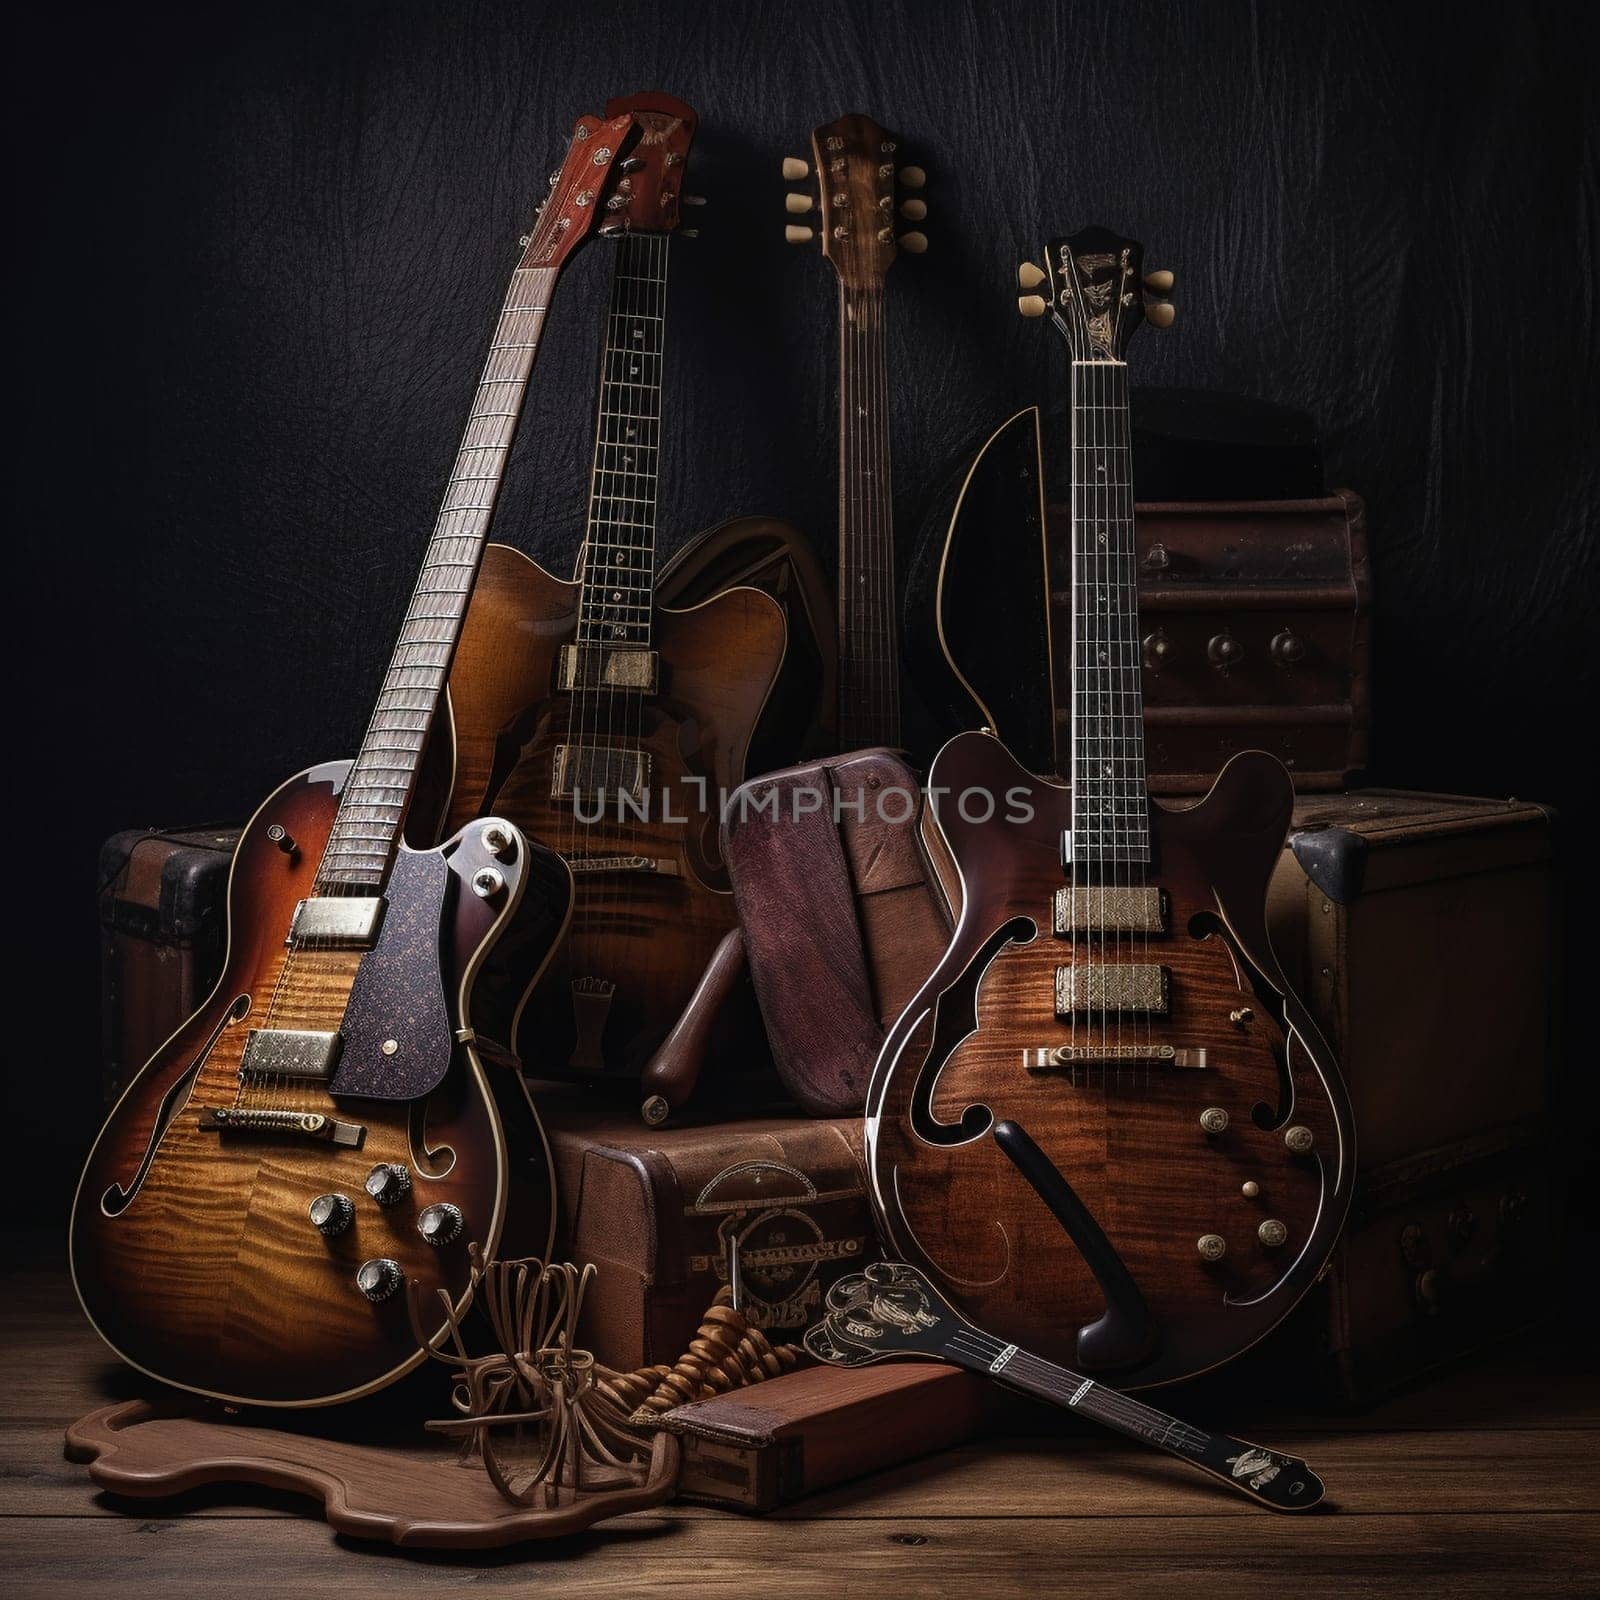 Wooden Musical Instruments Showcase Image by Sahin